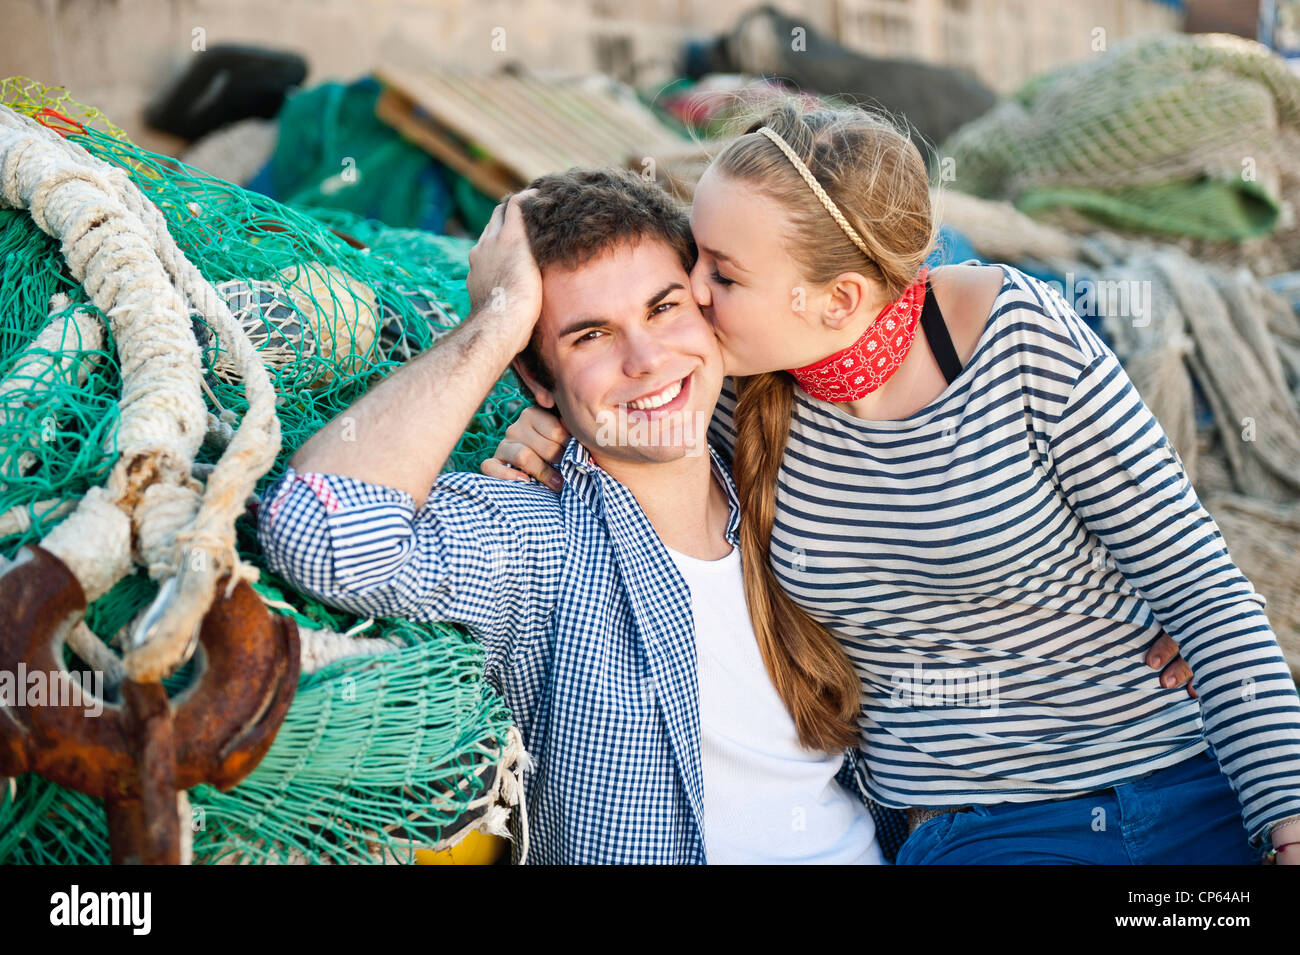 Spain, Mallorca, Couple at harbour with fishing nets, smiling Stock Photo